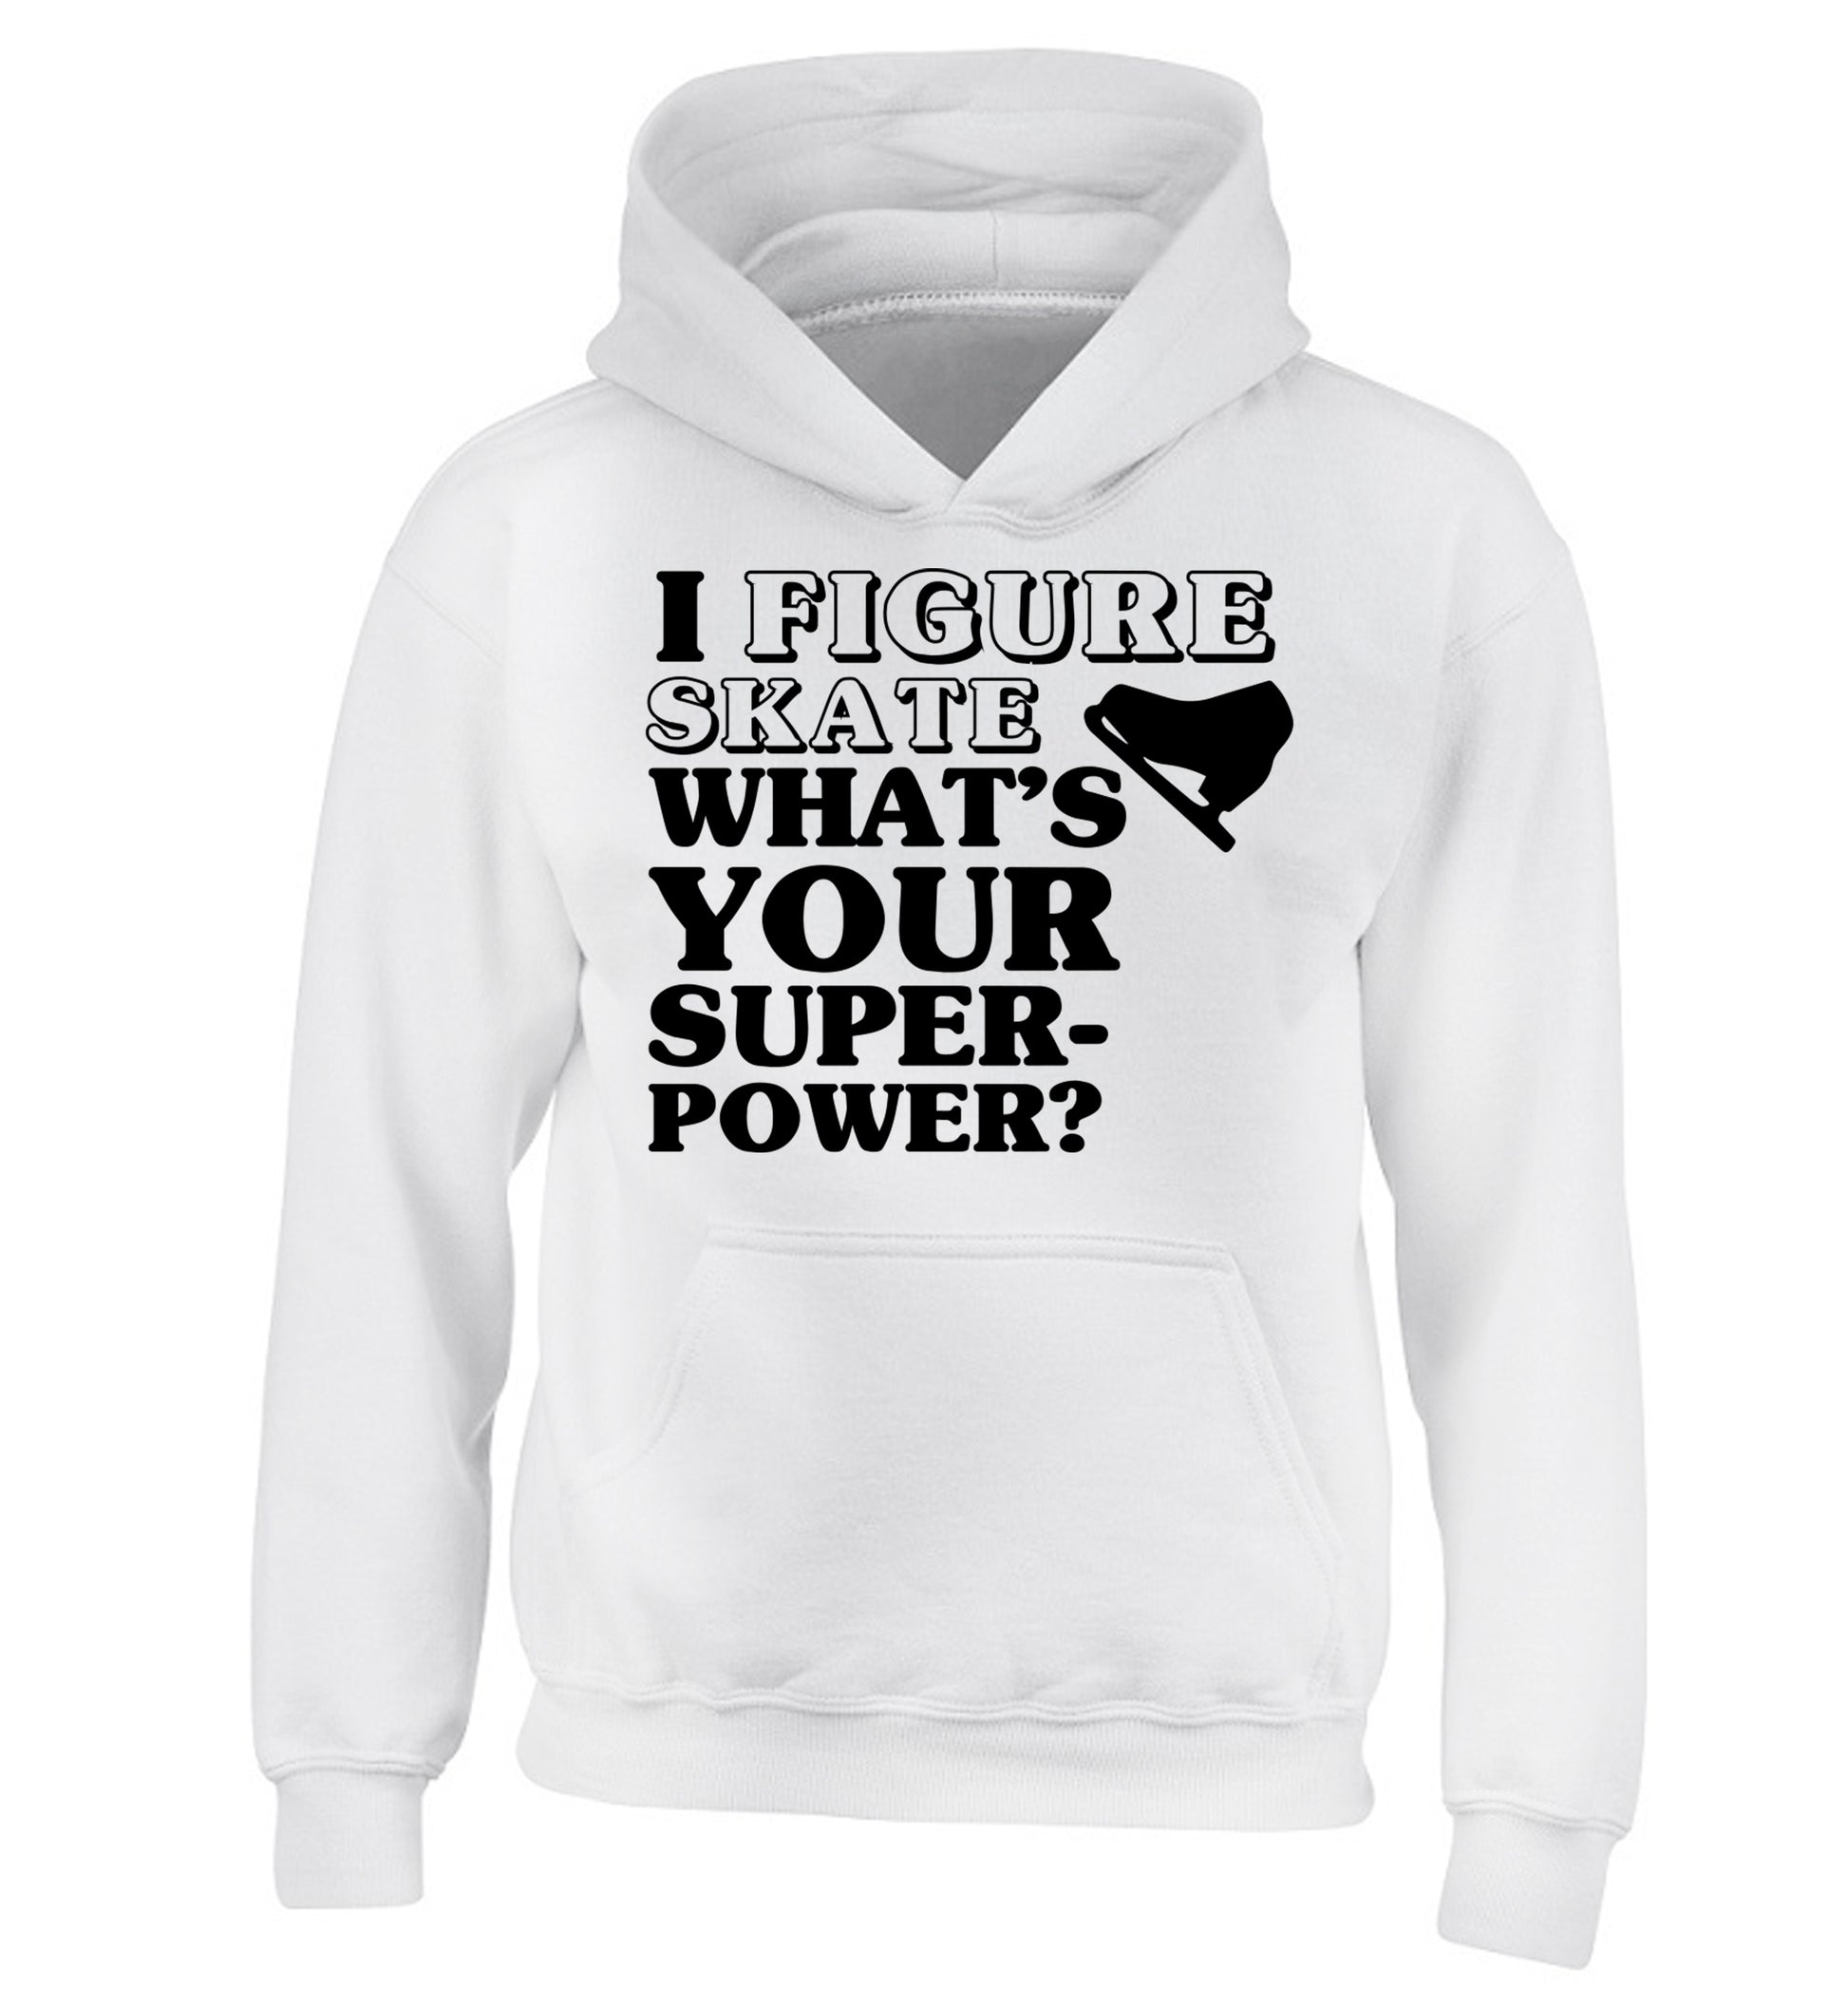 I figure skate what's your superpower? children's white hoodie 12-14 Years